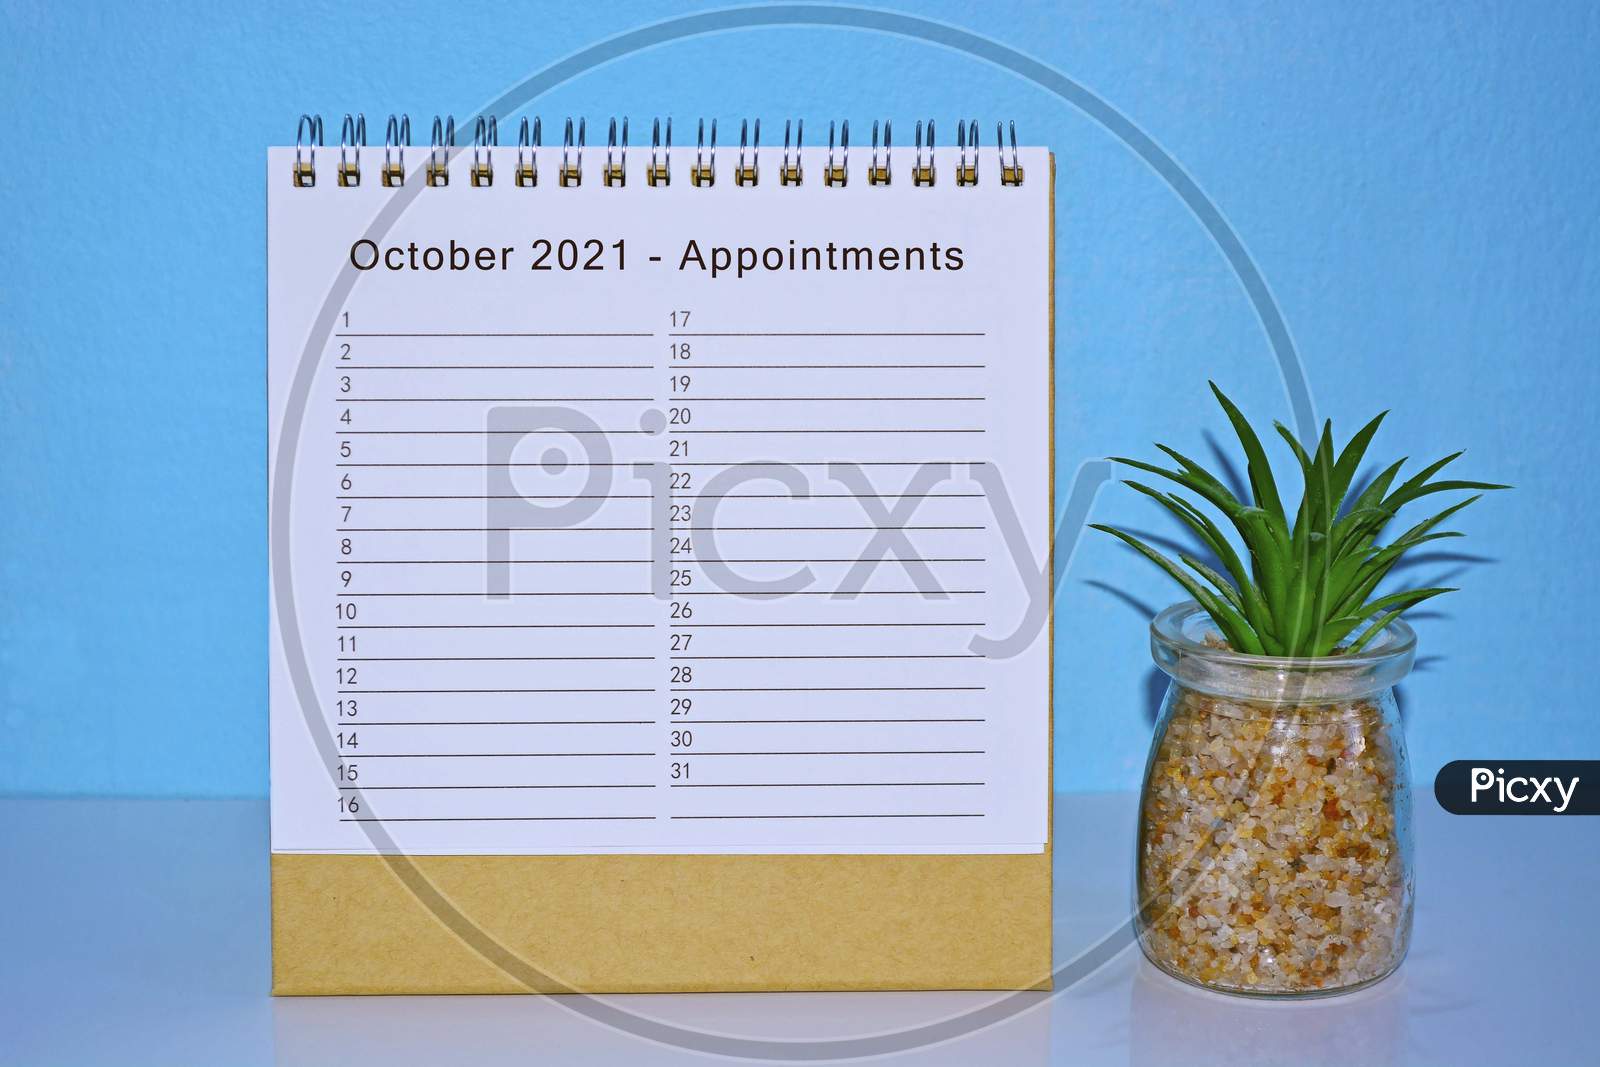 October 2021 Appointment Calendar With Blue Background And Potted Plant